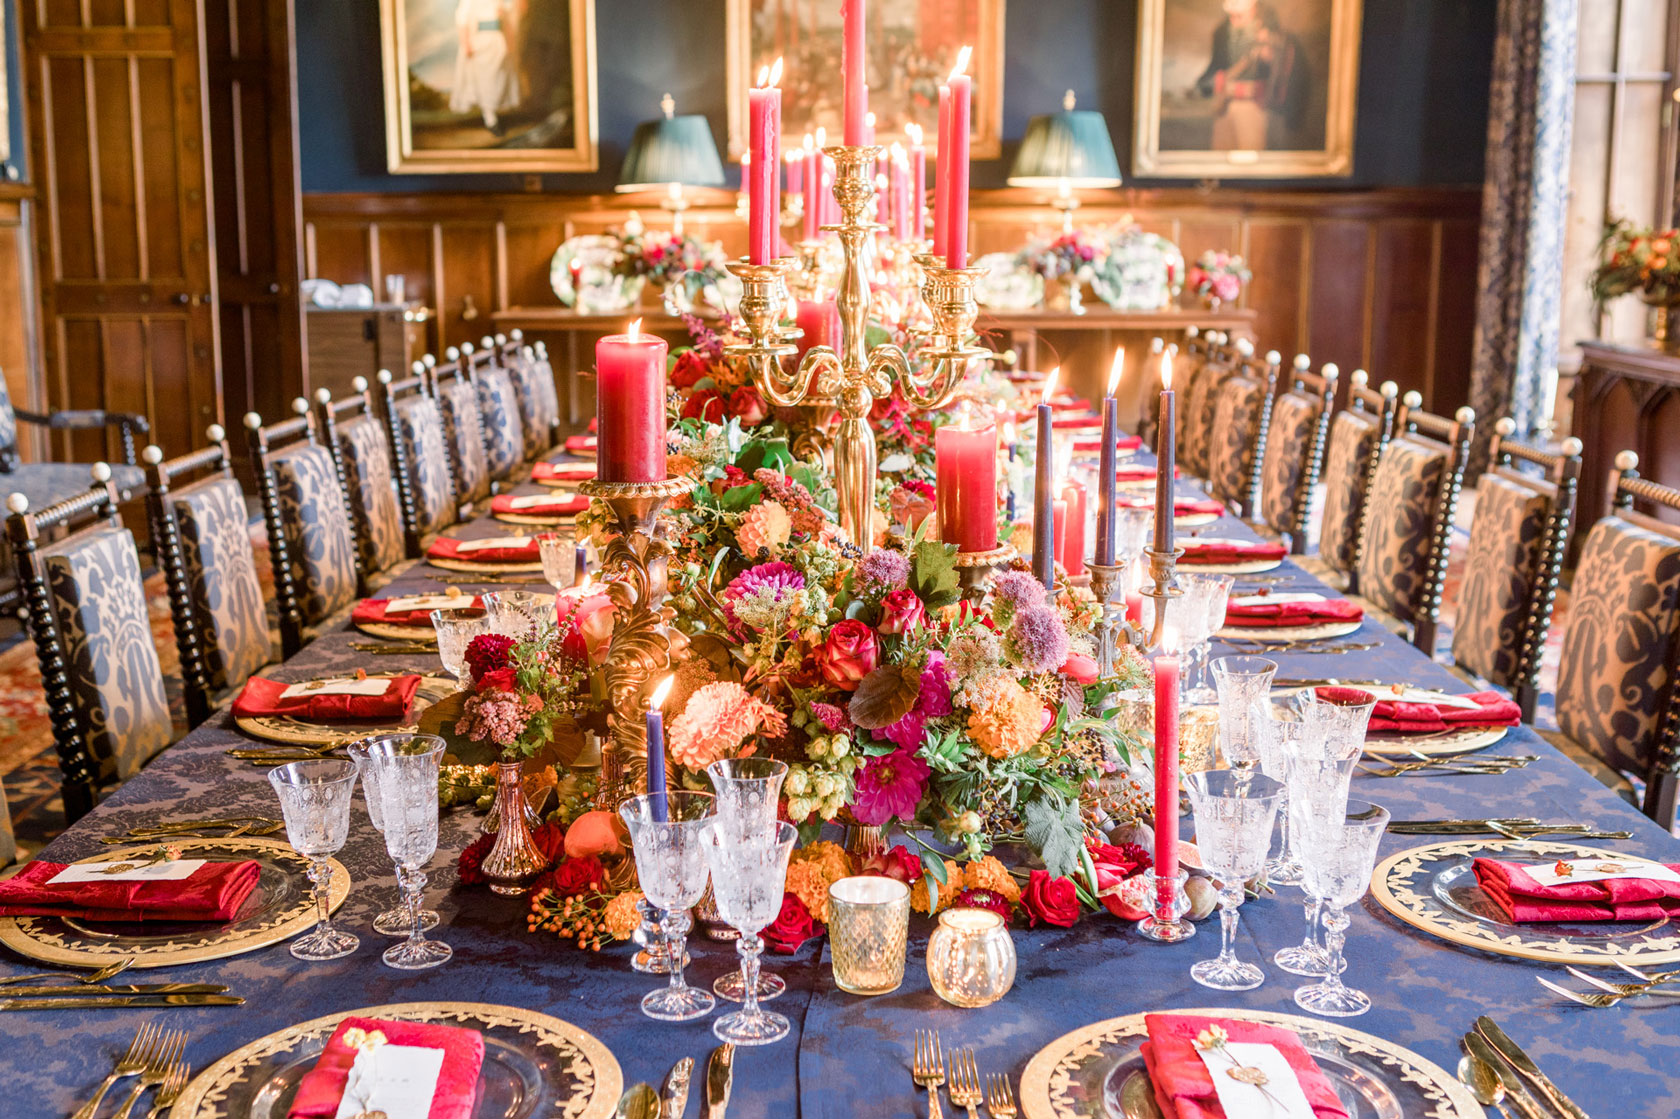 a long table regal inspired wedding brekfast table in a castle with navy linen, gold charger plates and cutlery, gold candelabras with red candles